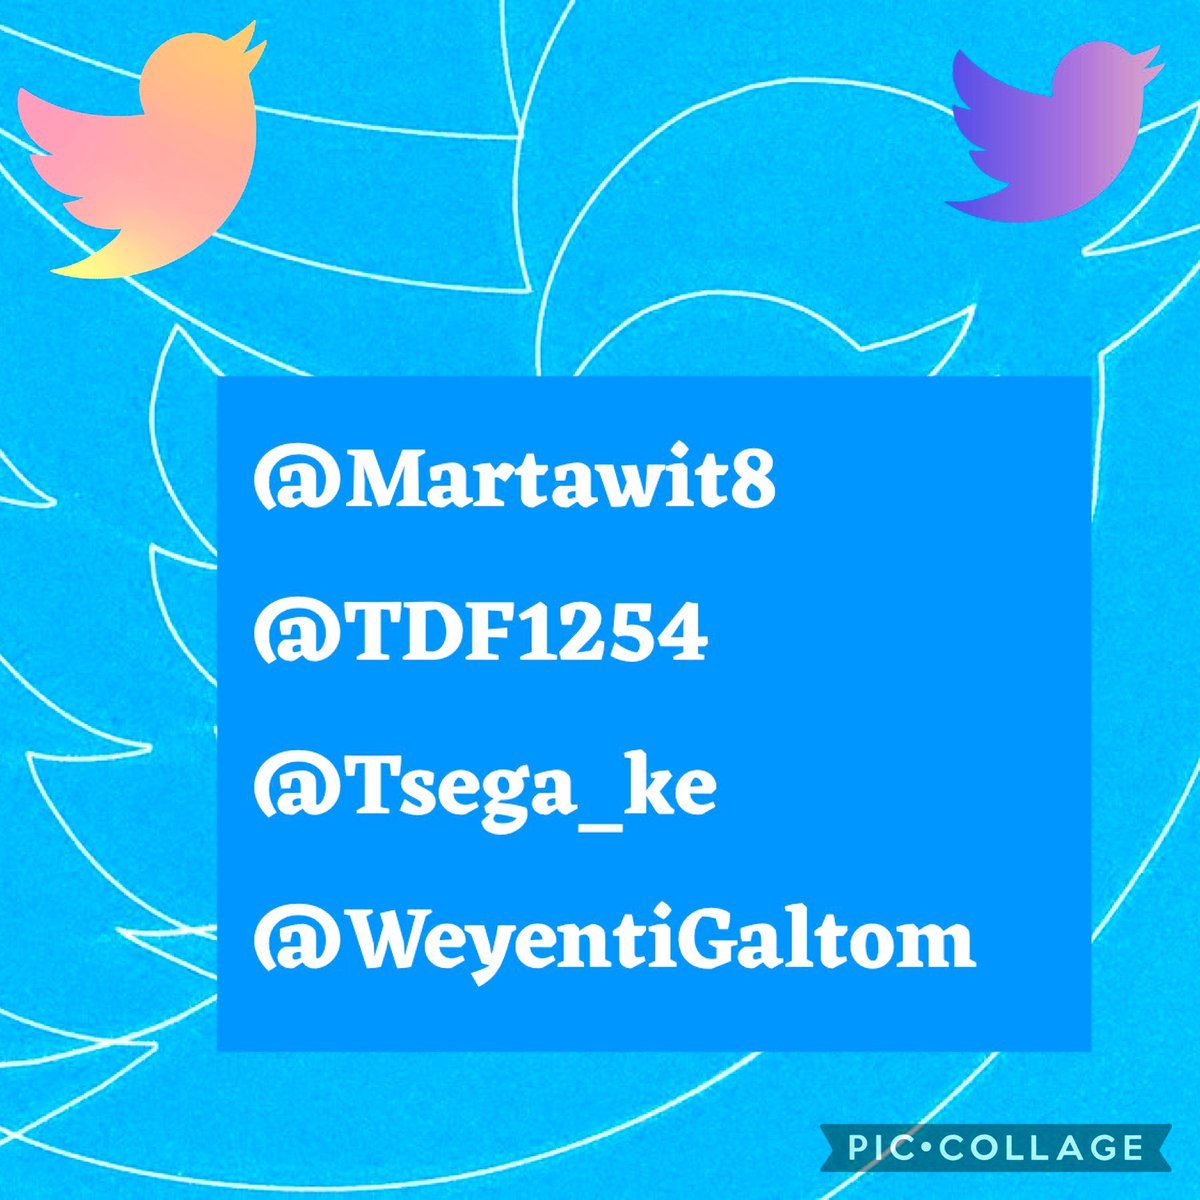 ↪Dear ⤵️
@X @XCreators 
@elonmusk
@ElonMuskAOC
@XSpaces
@TwitterDesign 
We are kindly asking you to #Unsusspend the attached Justice Seekers accounts. @Martawit8
@TDF1254 
@Tsega_ke  
@WeyentiGaltom 

#Justice4TigrayGenocide @wegahta21